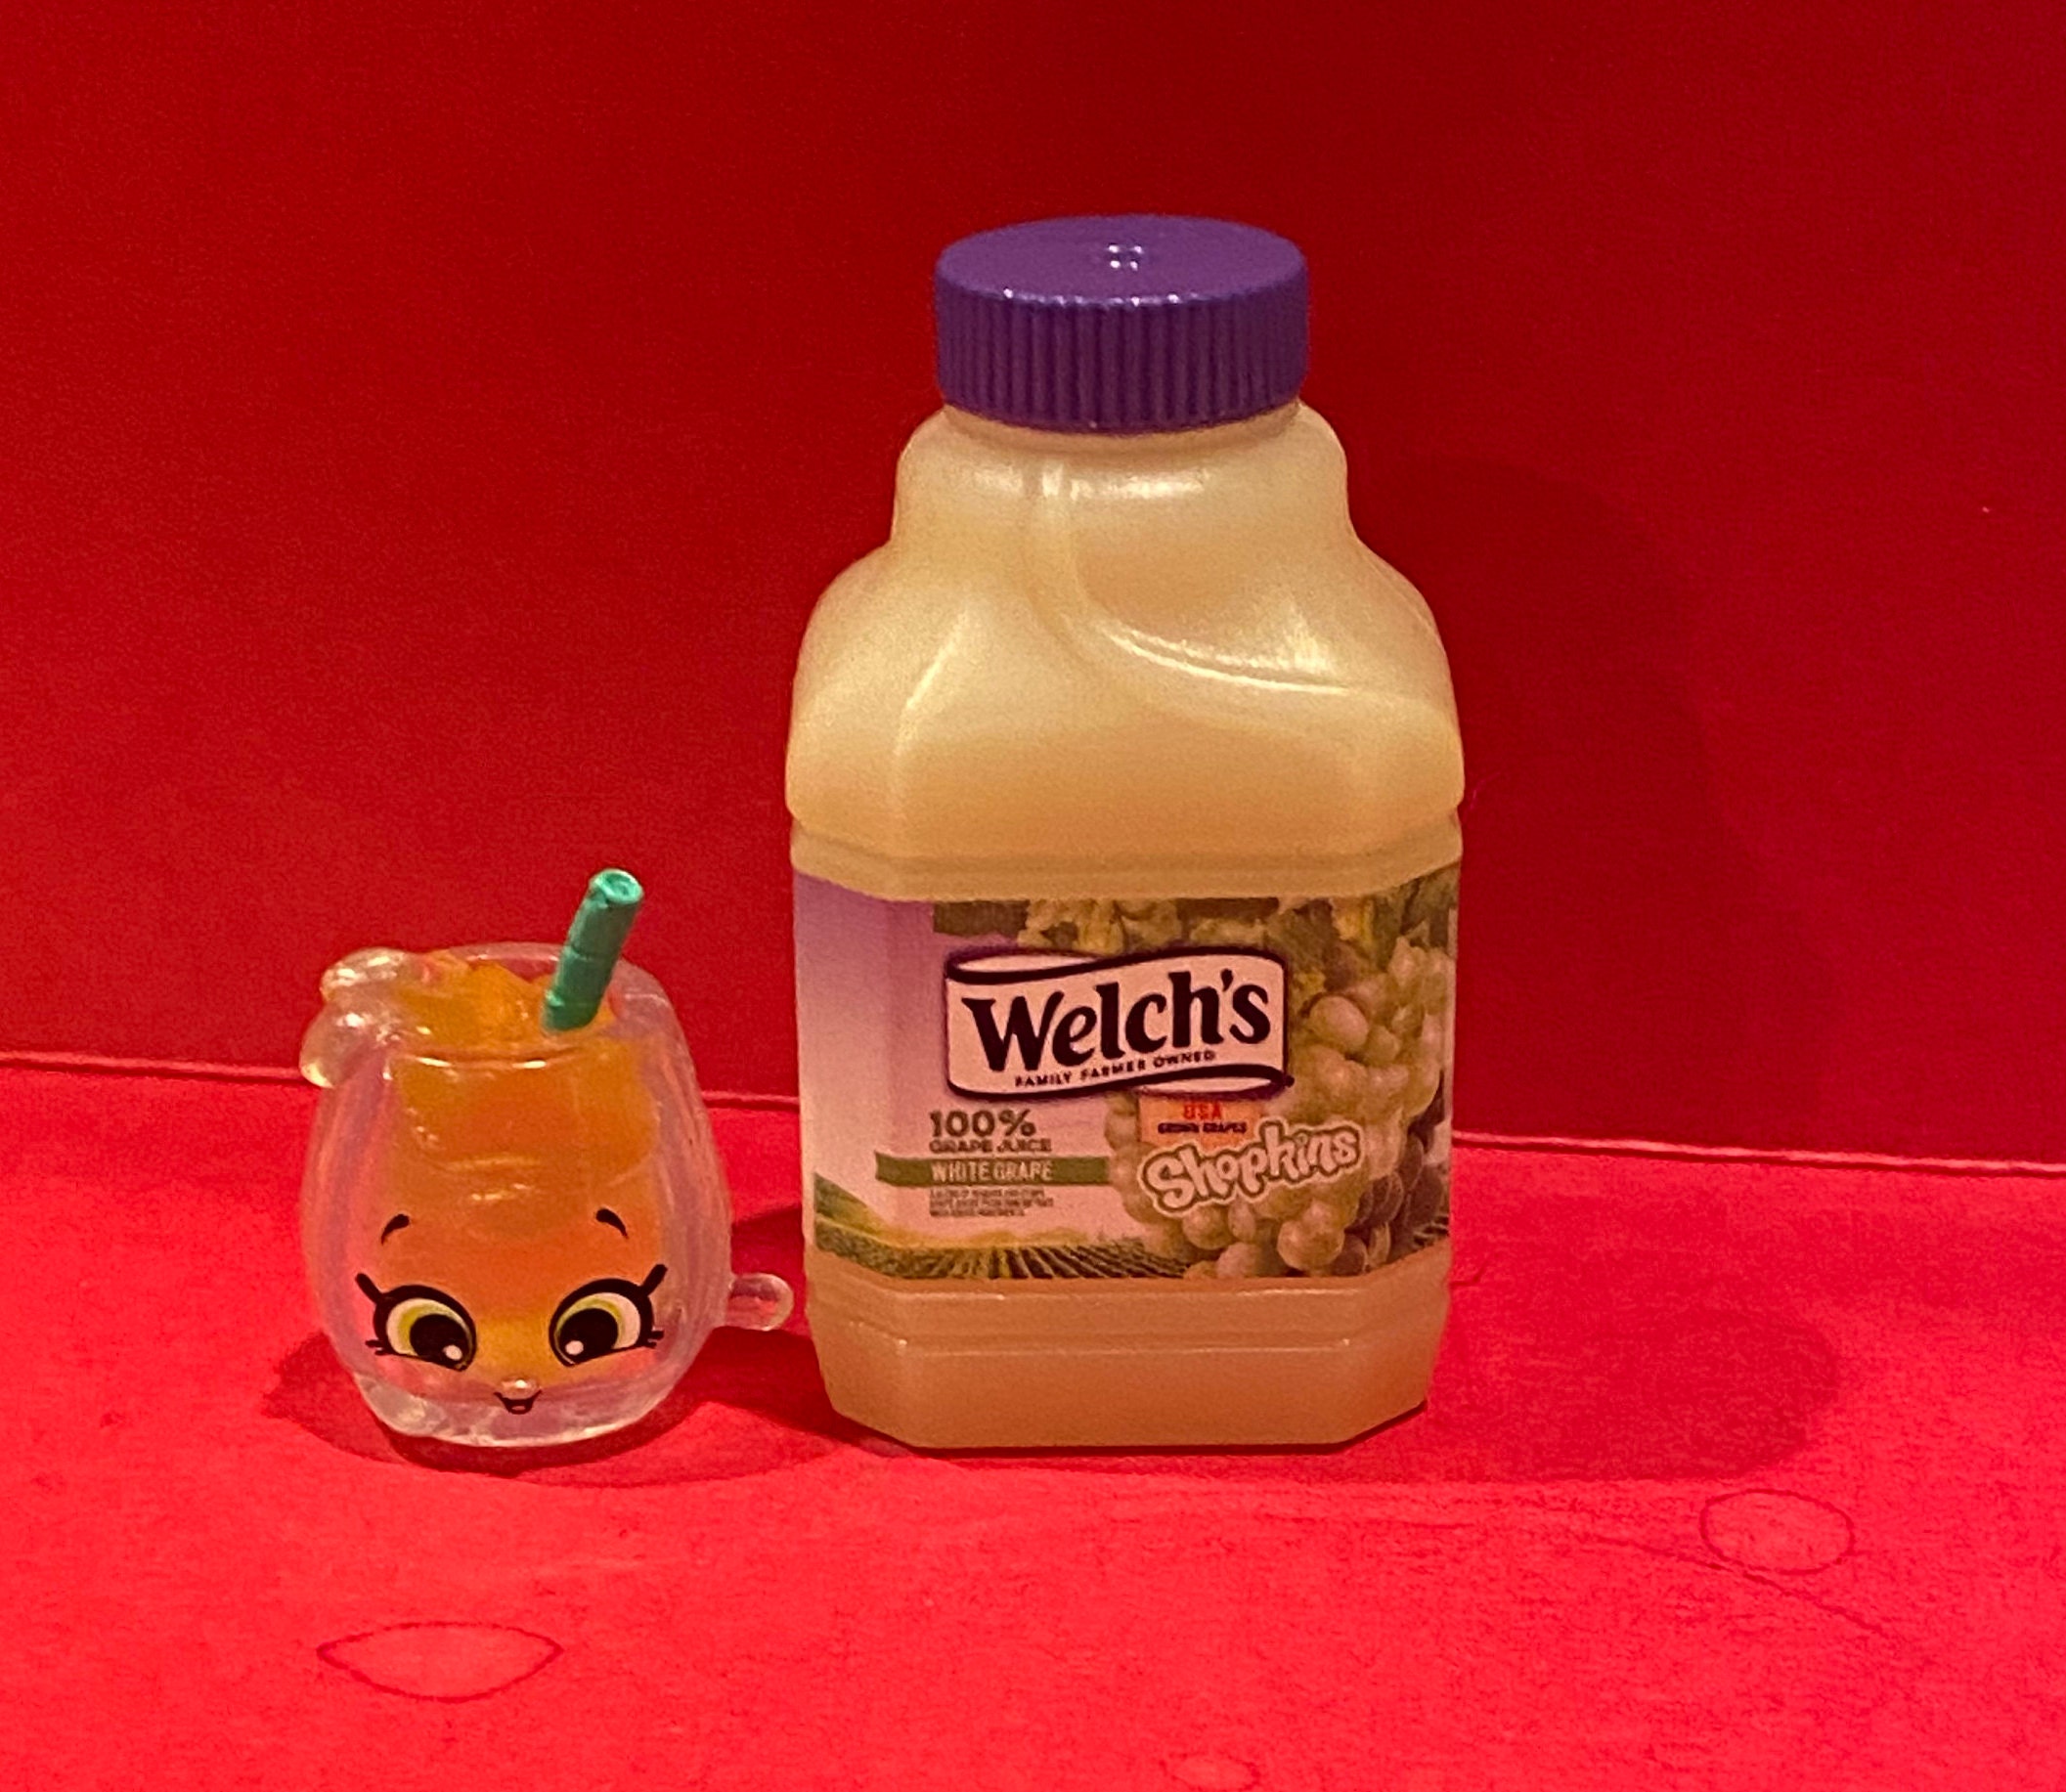 Real littles by Shopkins Welchs White Grape Juice | Etsy